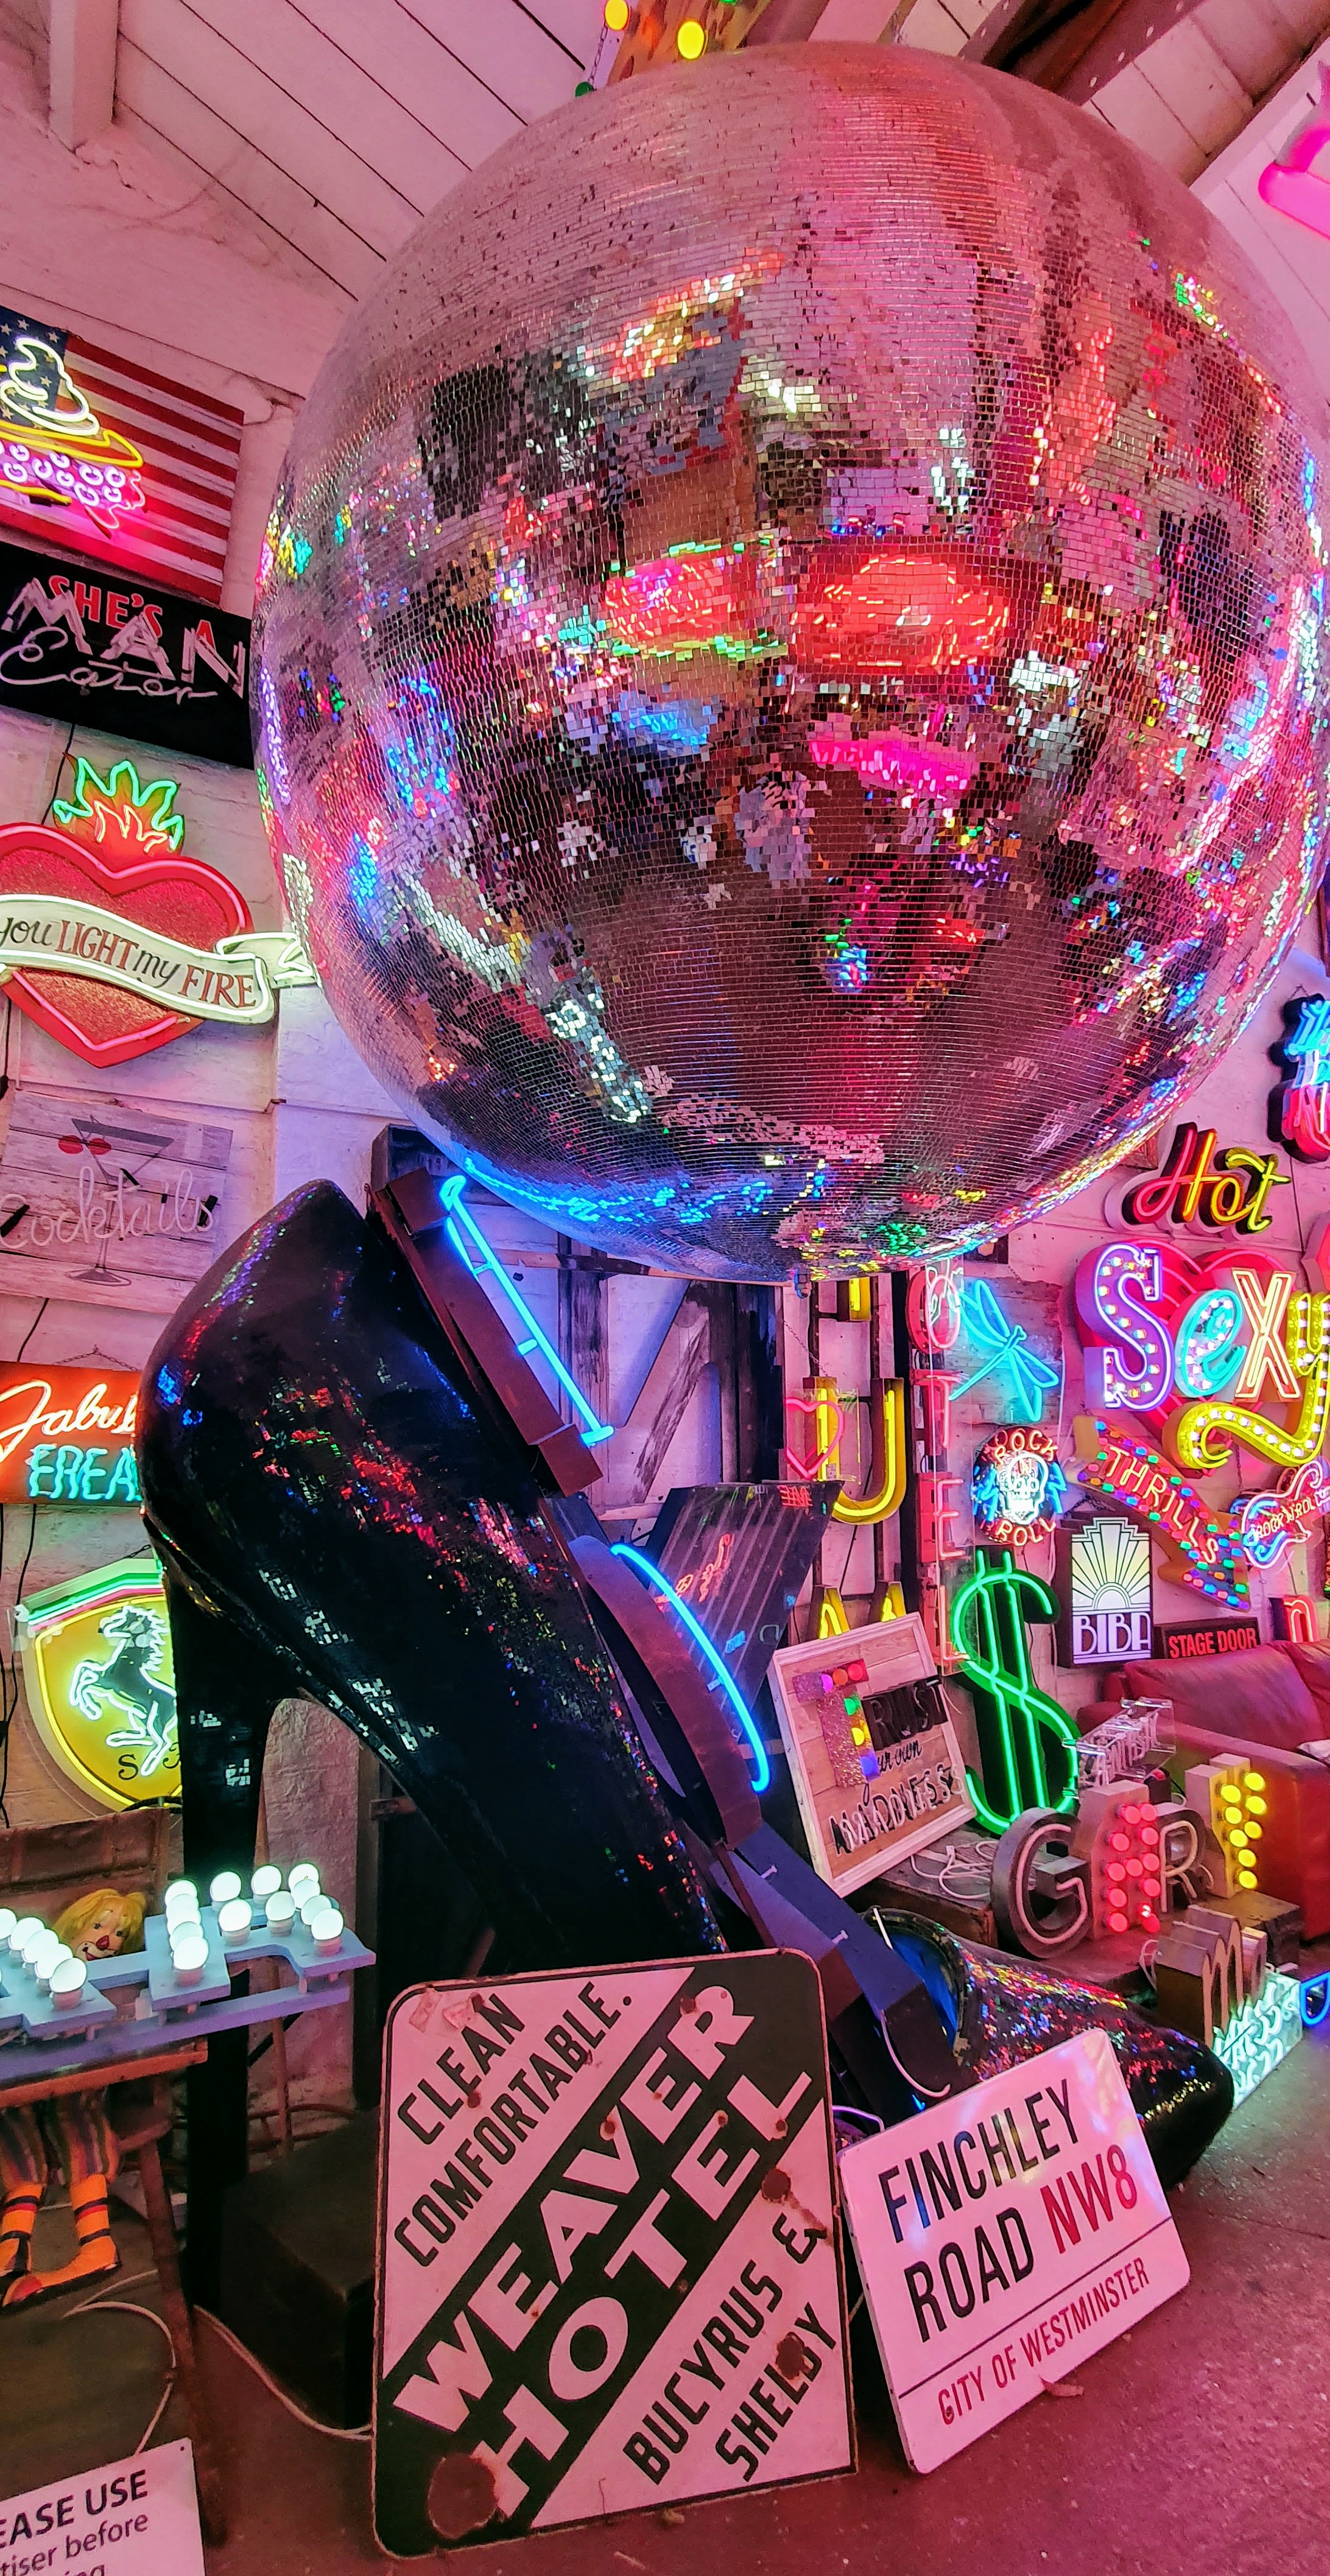 Glitter disco ball, neon lights and signs at God's Own Junkyard, Walthamstow, London